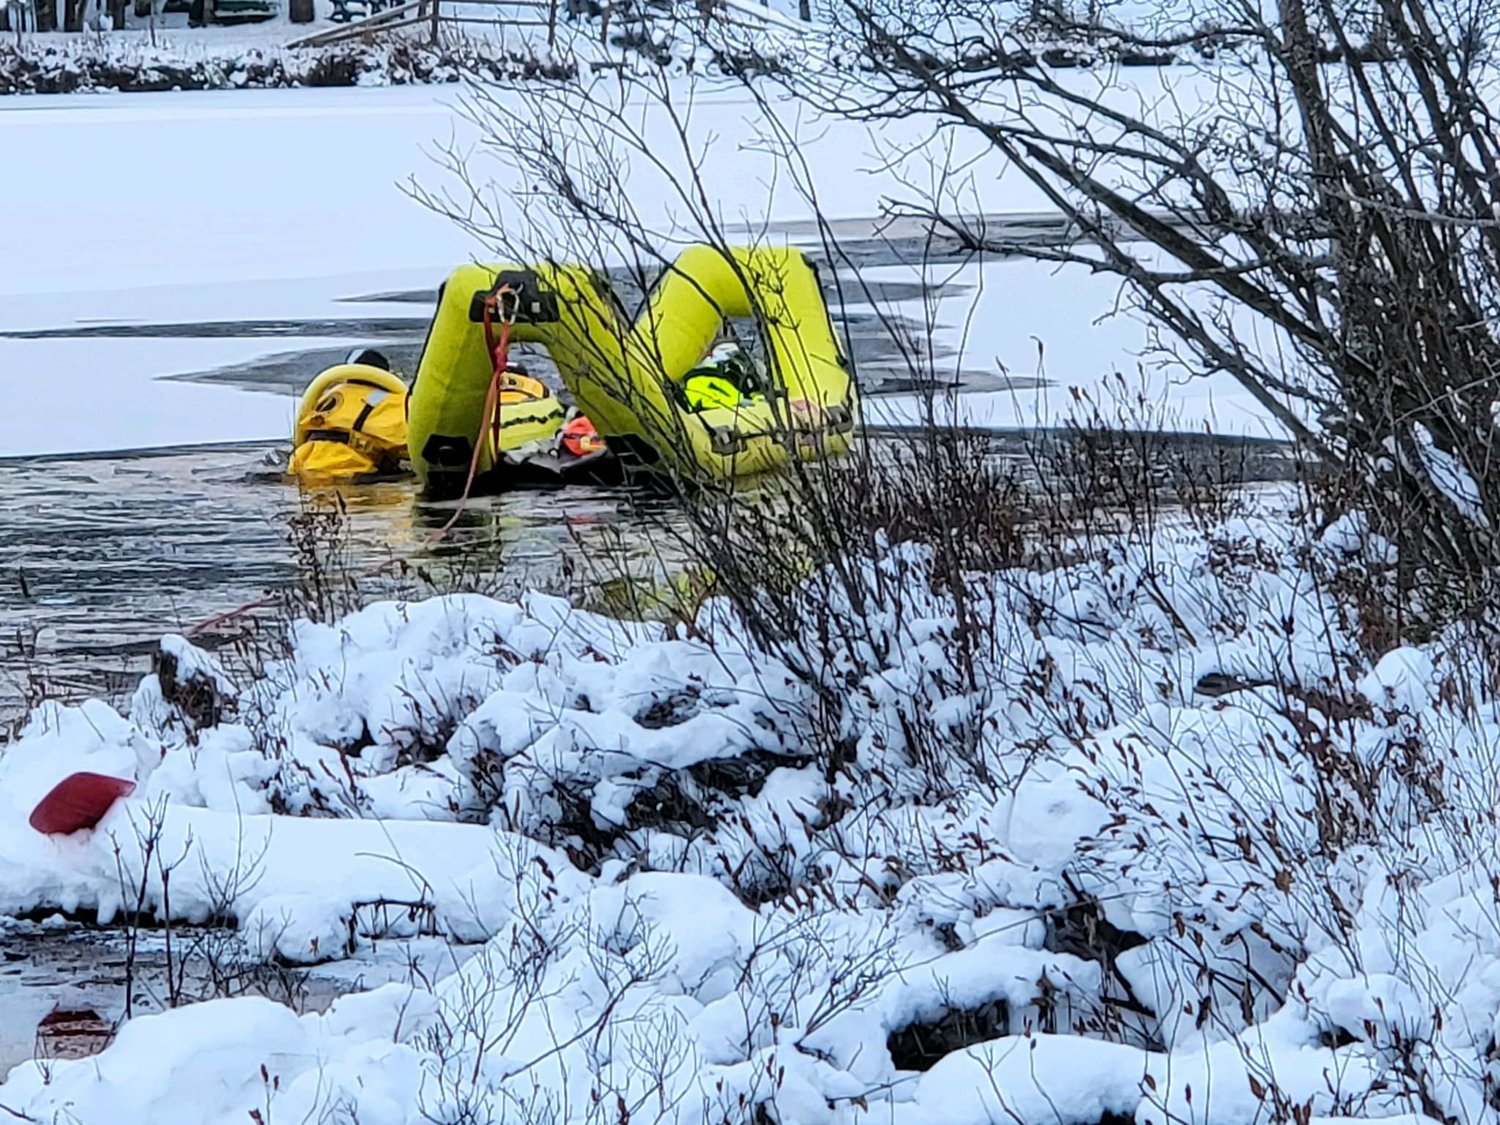 The Trenton ice water rescue team used an inflatable raft and dry suits to rescue a Labrador Retriever from Snowbird Lake in Forestport on Saturday.